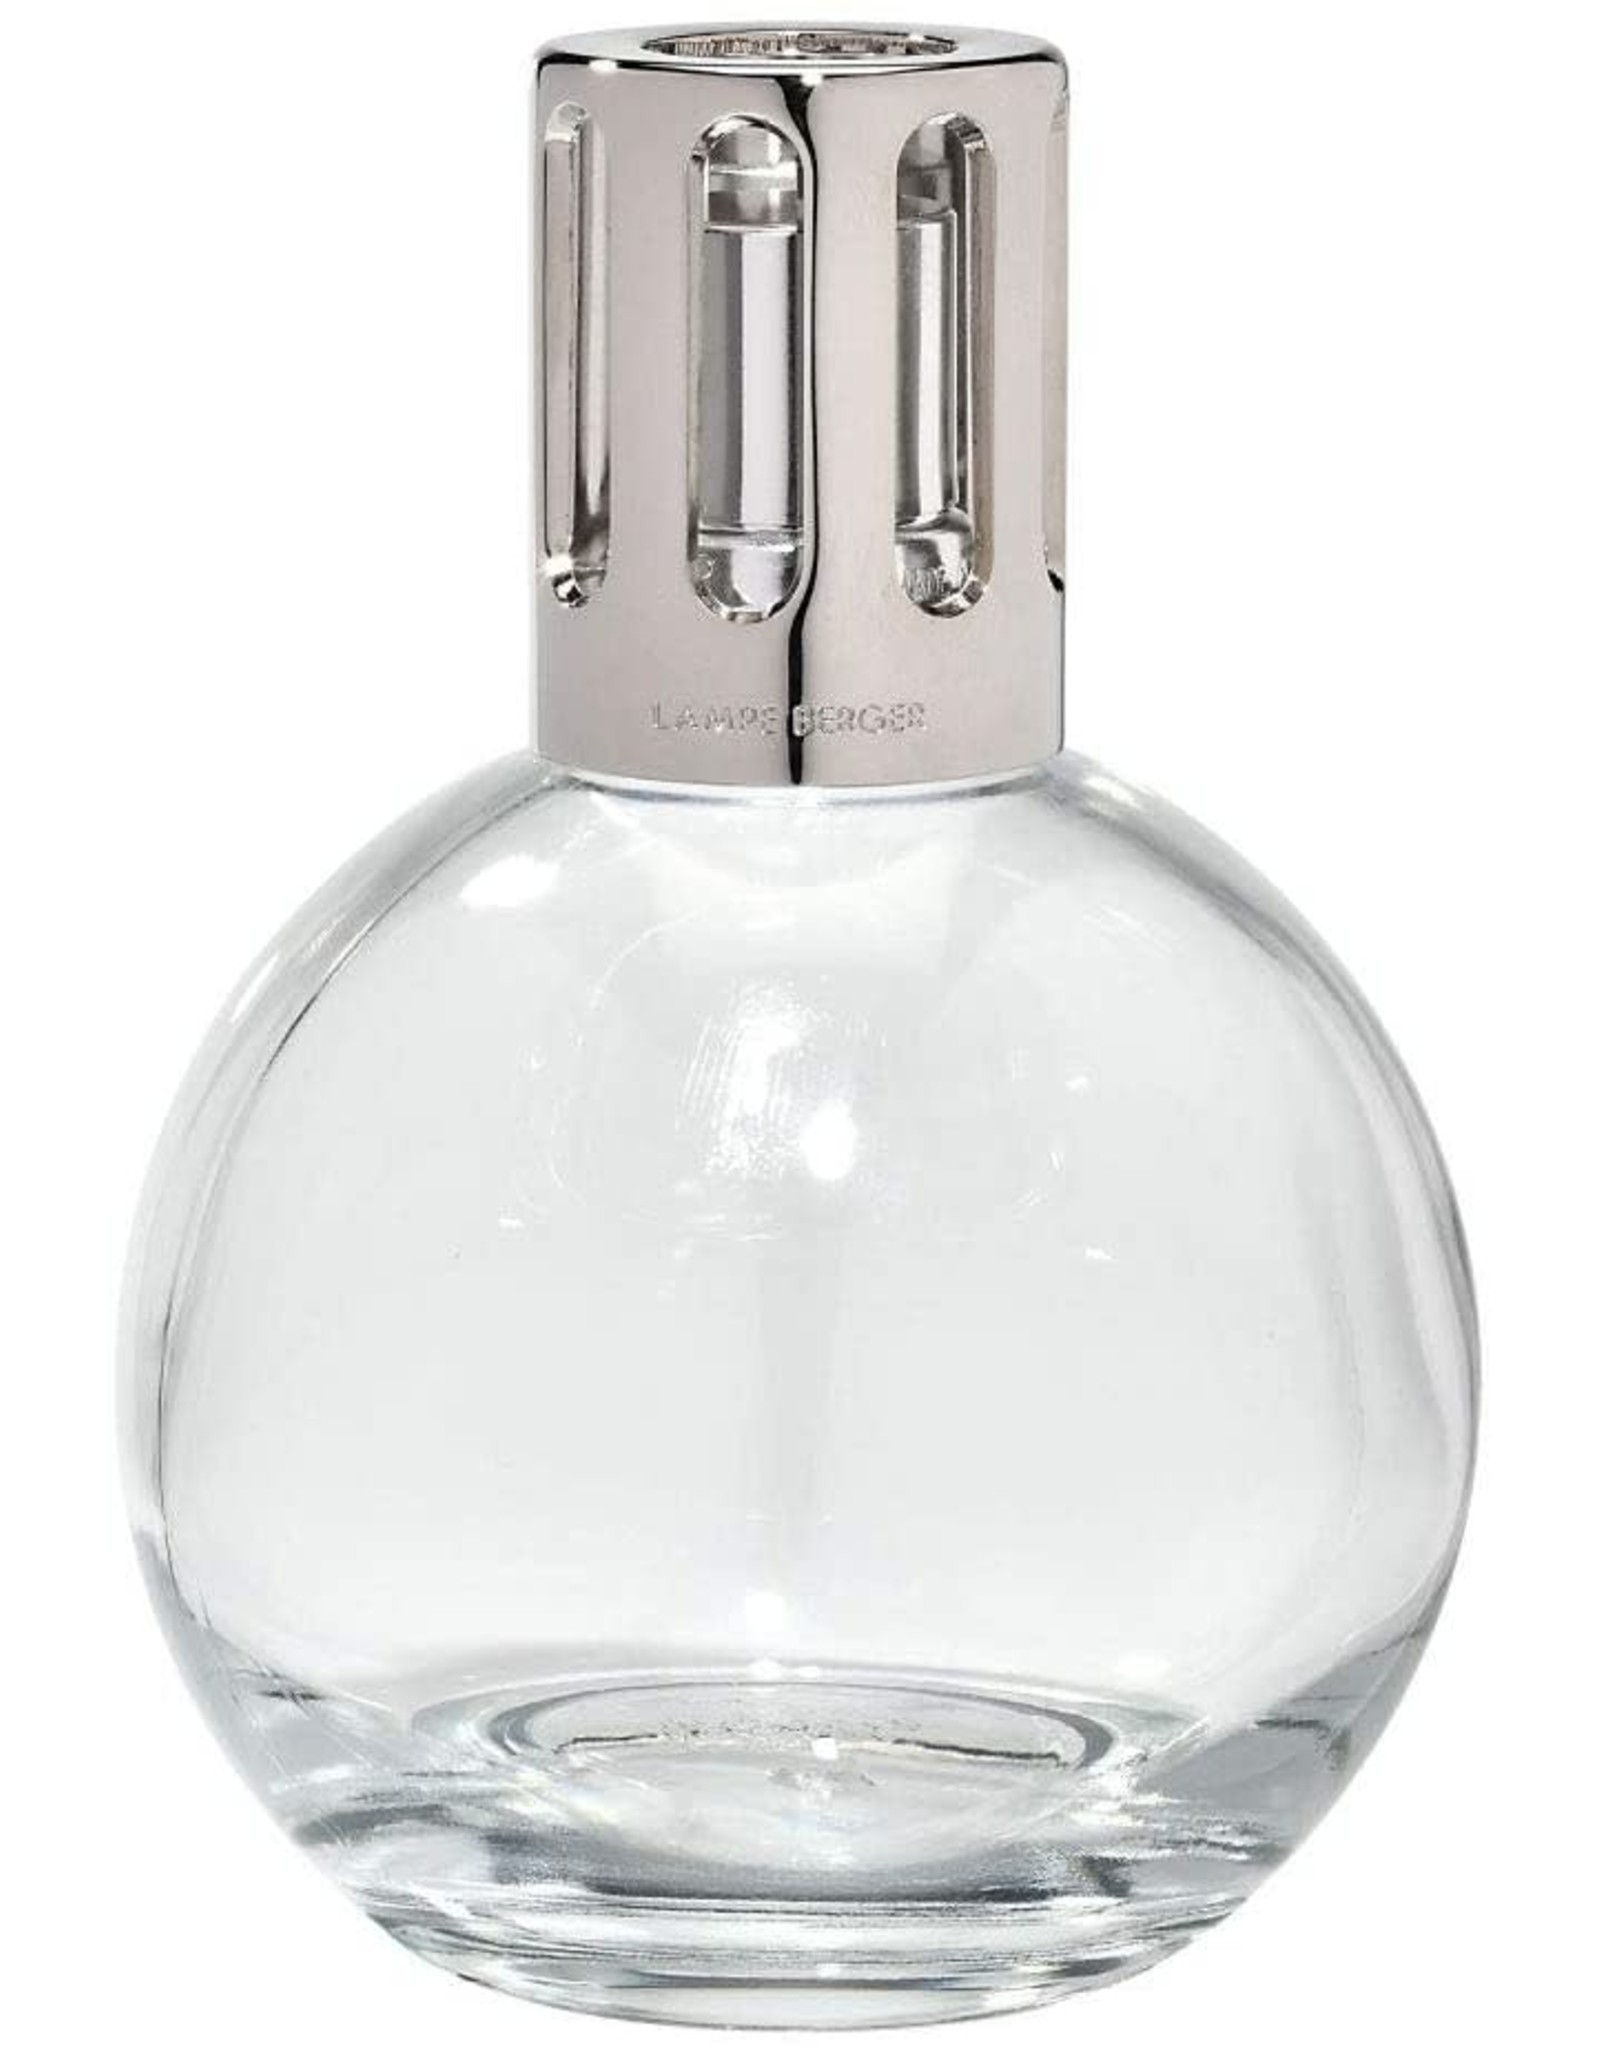 Lampe Berger Essential Round Fragrance Lamp Gift Set | Maison Berger